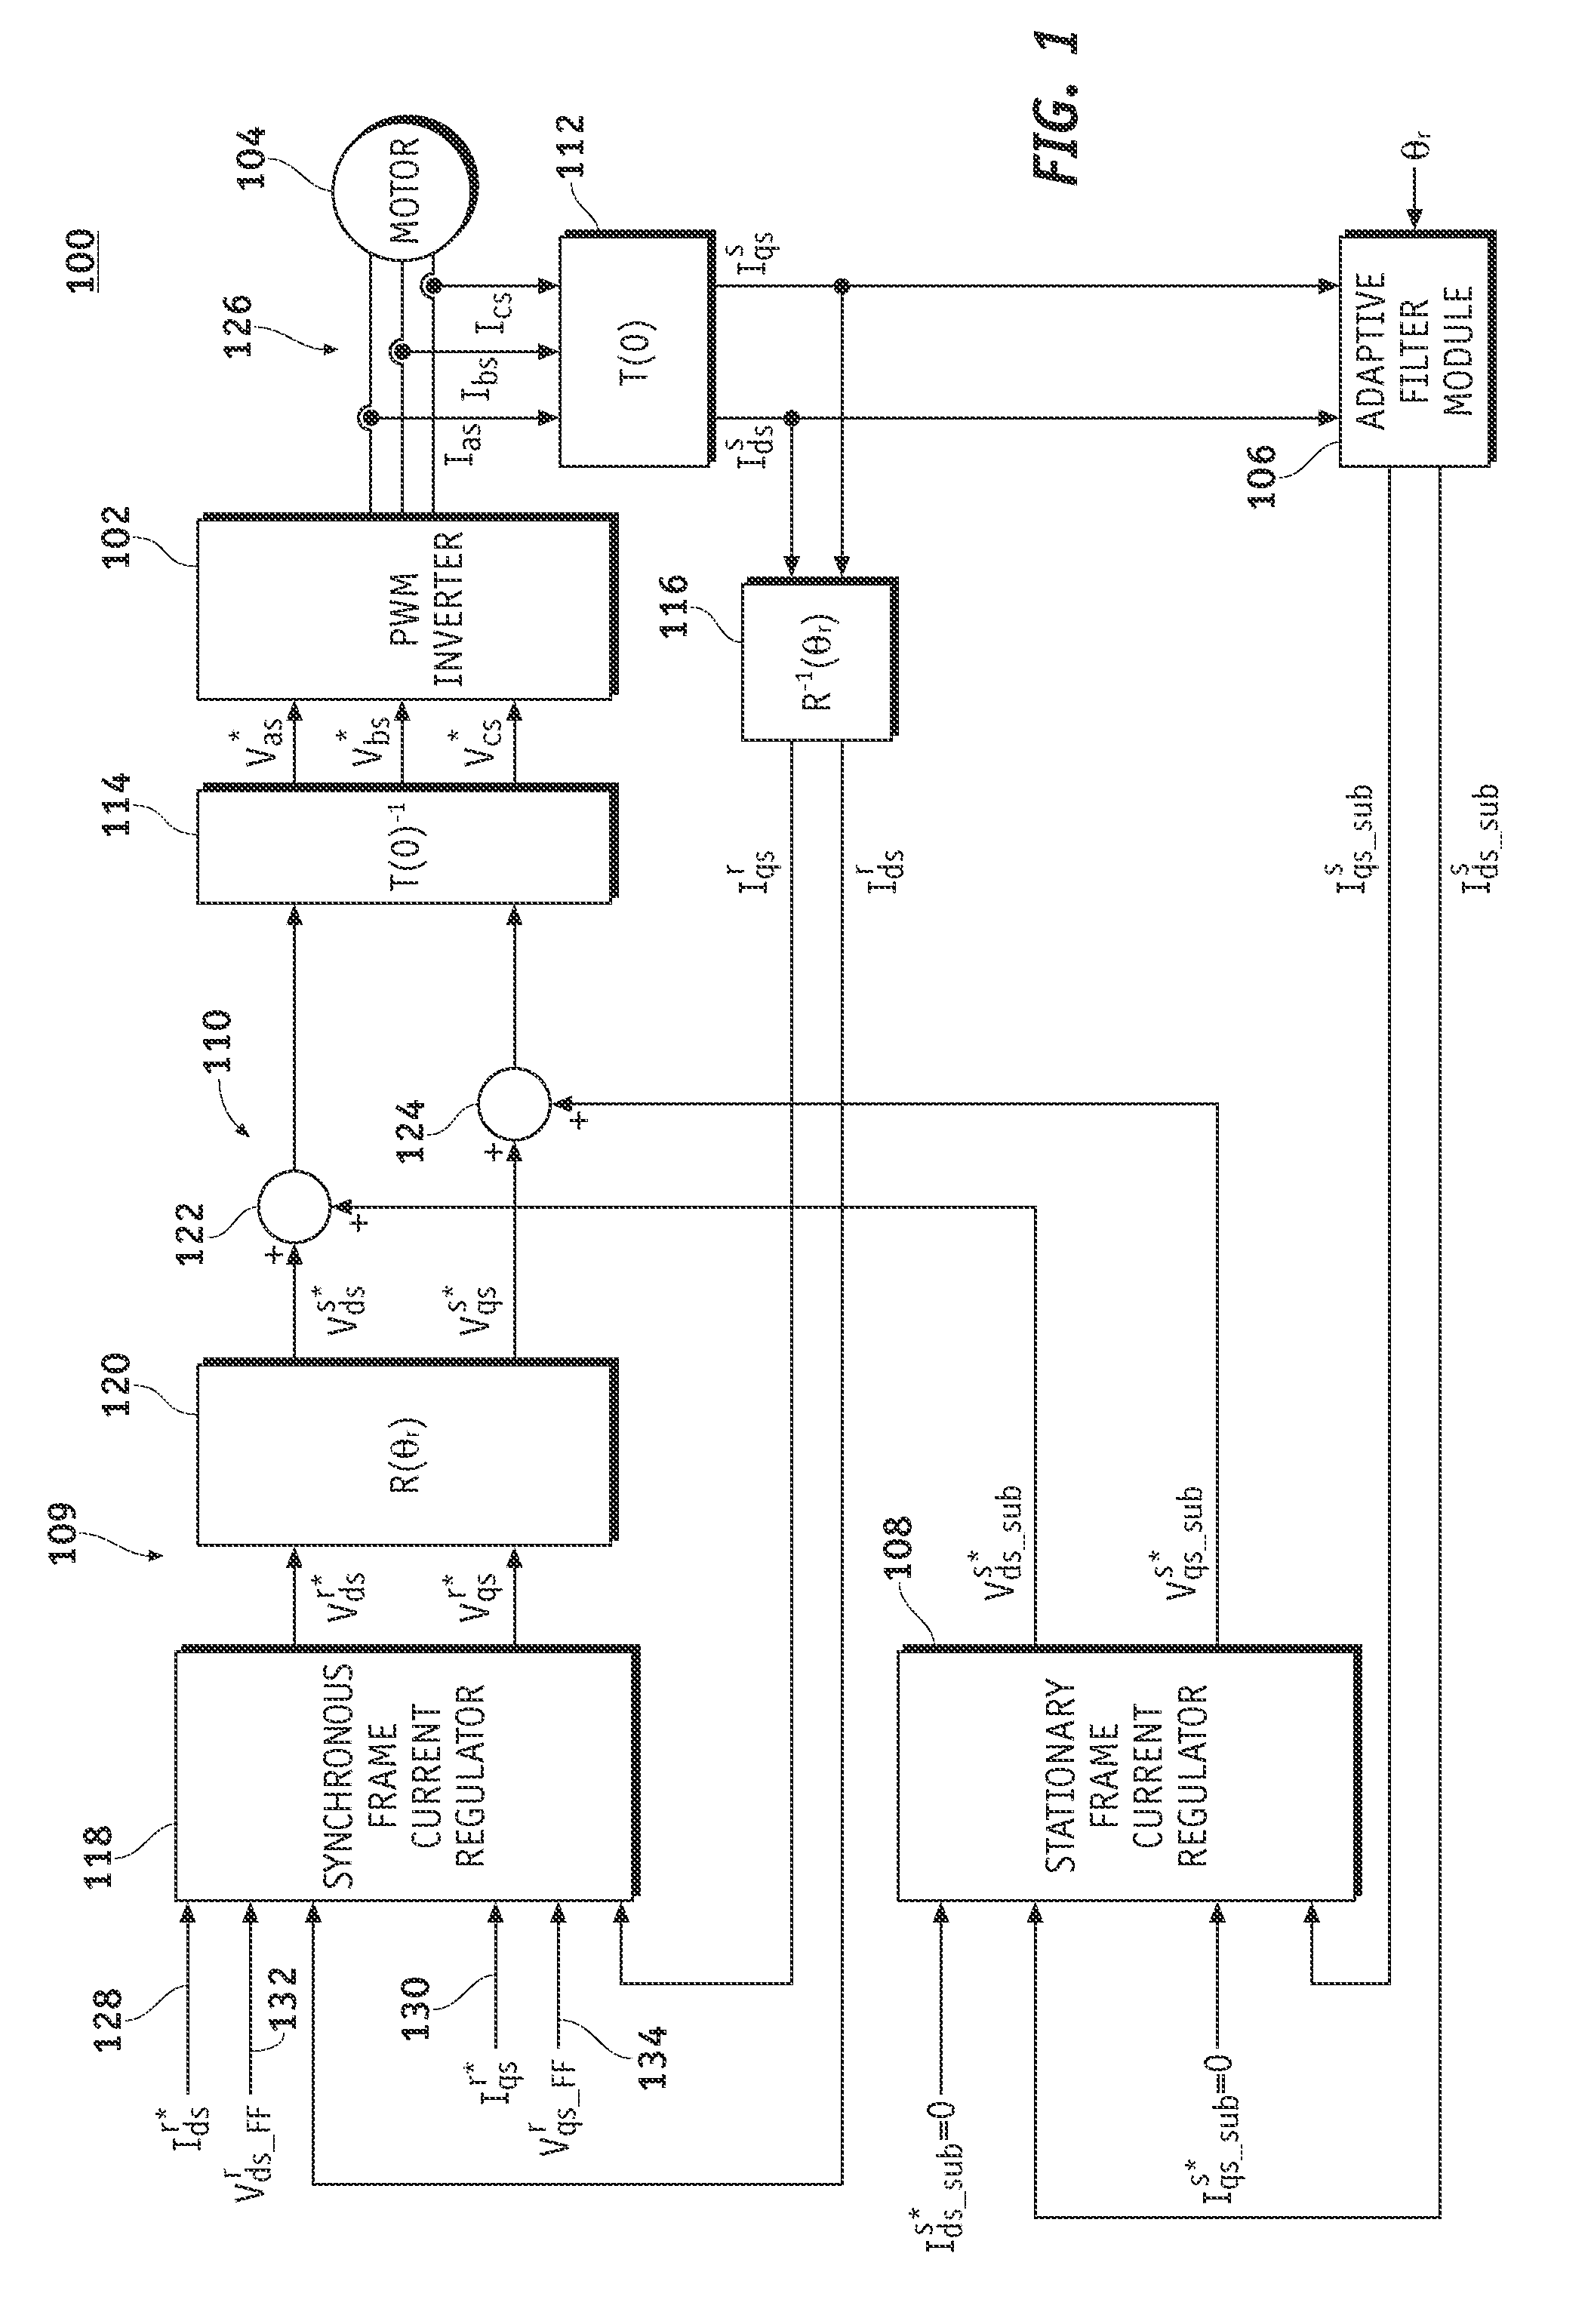 Reduction of subharmonic oscillation at high frequency operation of a power inverter